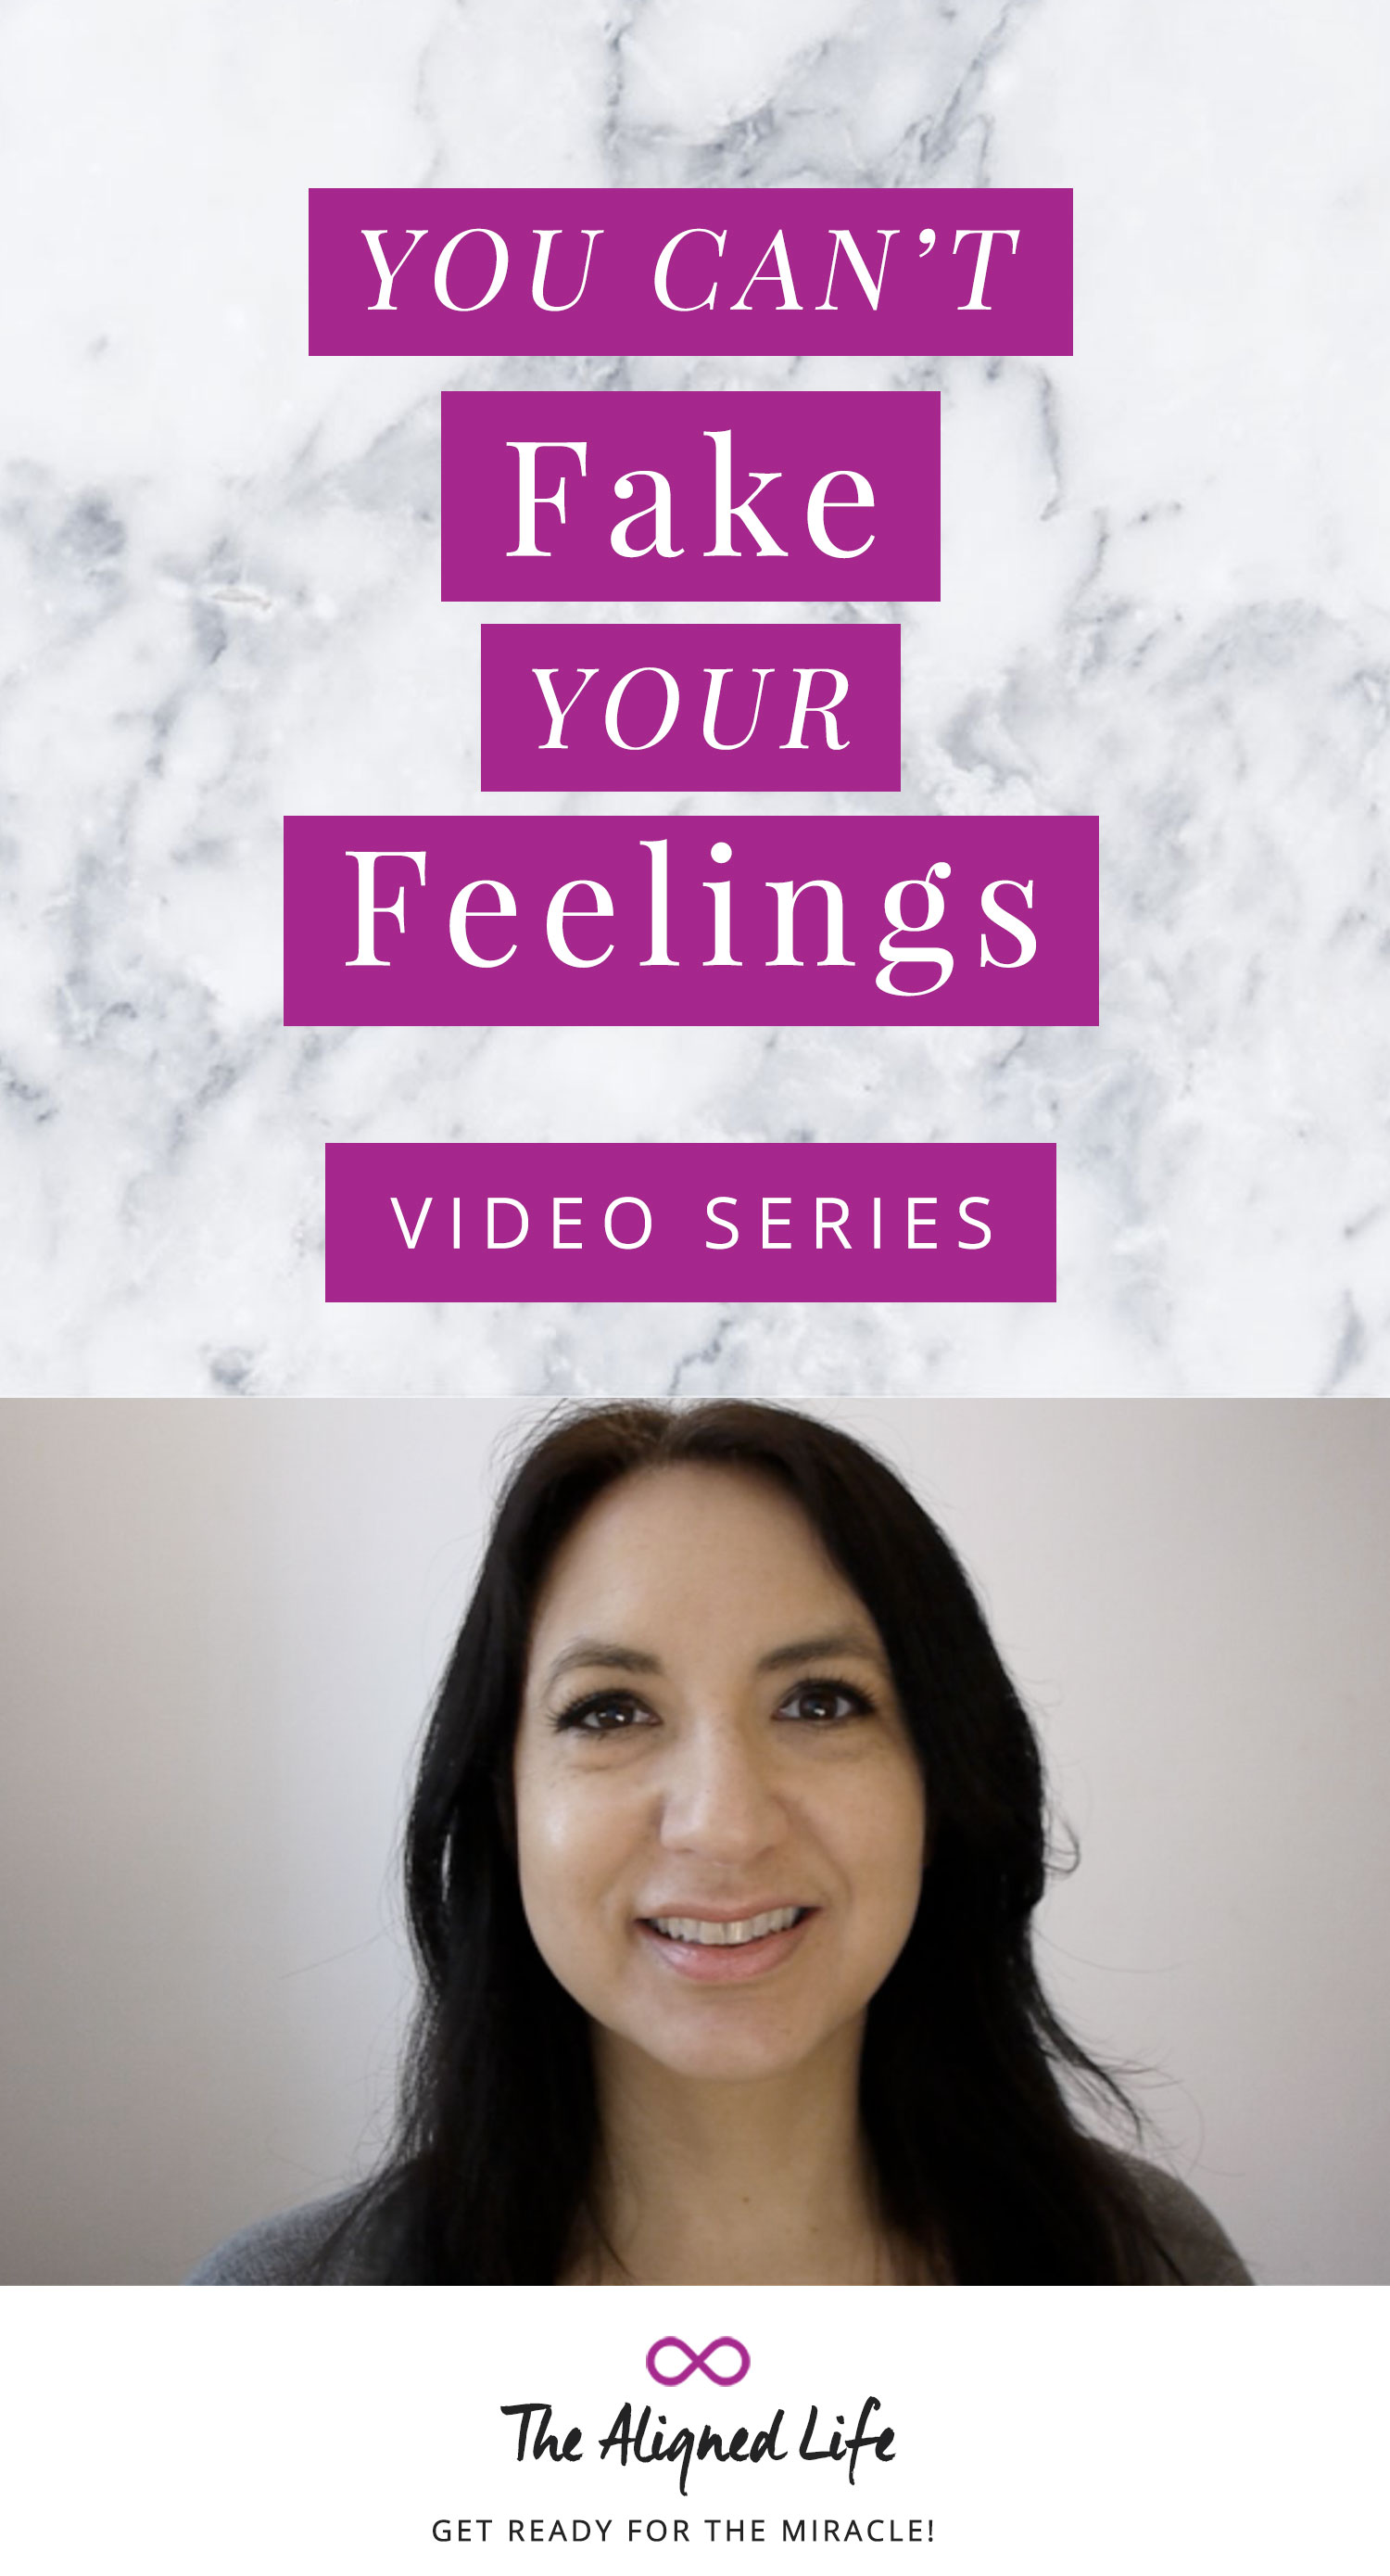 Video: You Can't Fake Your Feelings